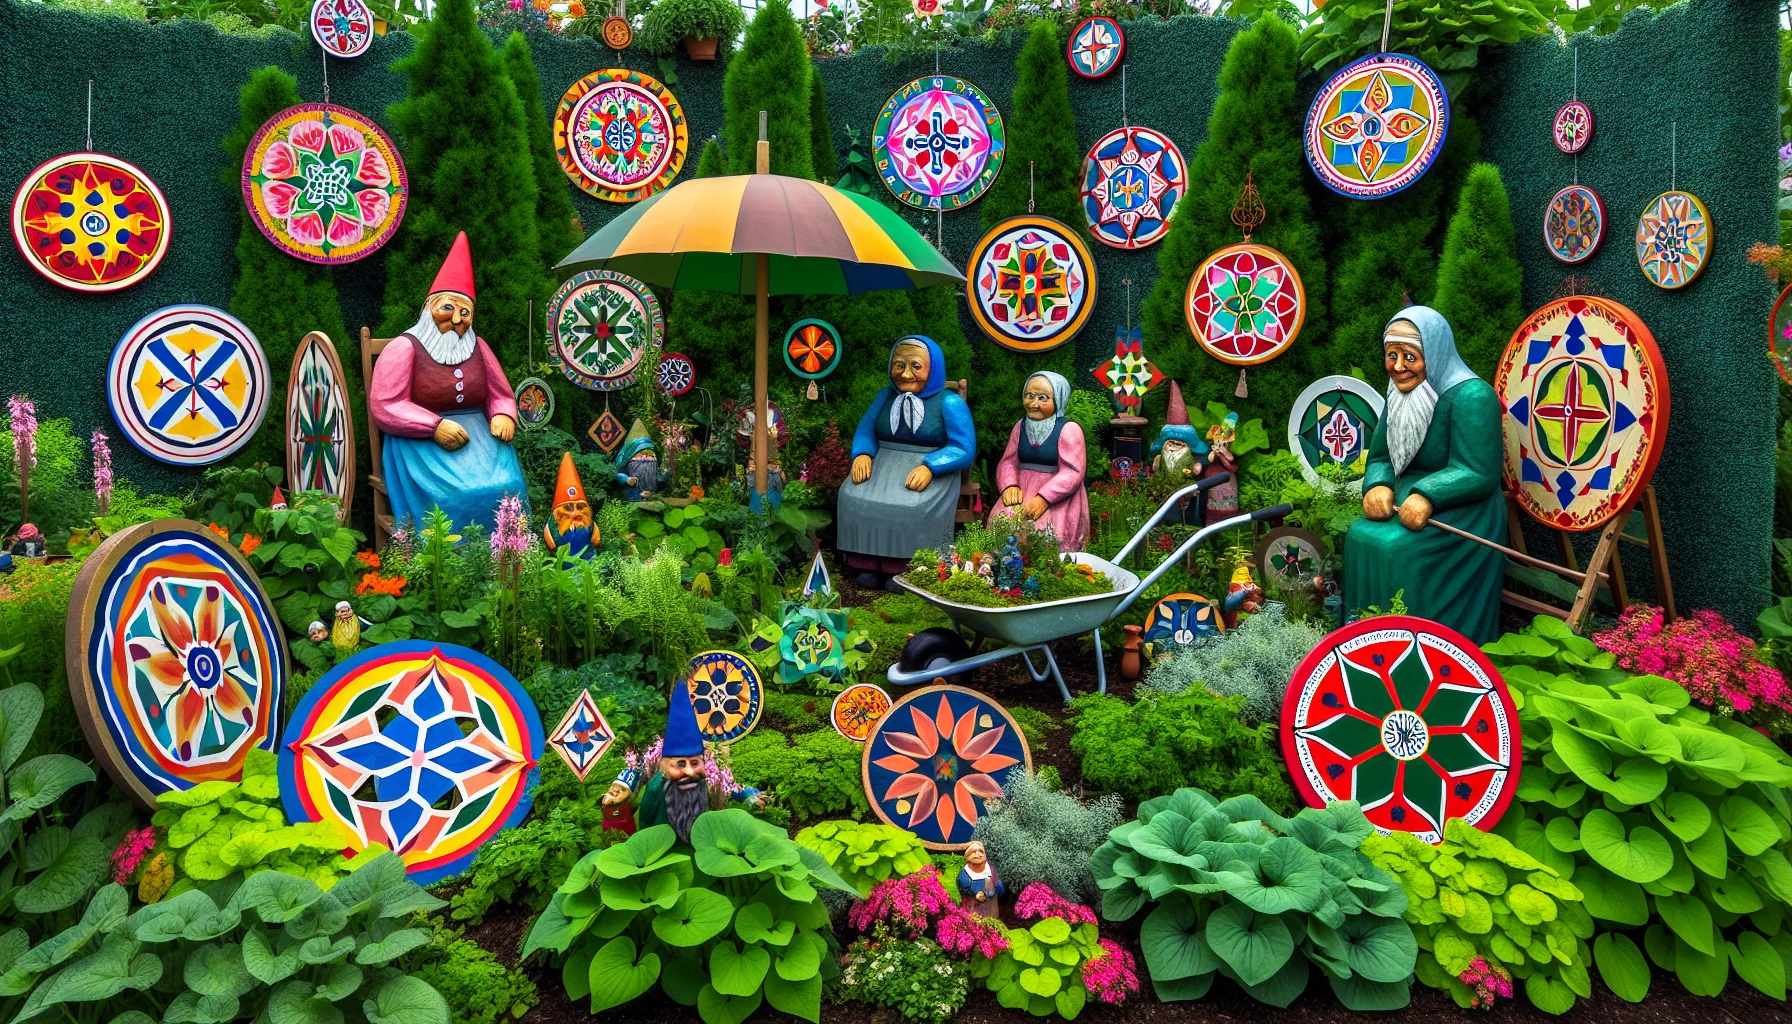 Create an amusing, vivid scene in a lush garden, where hex signs are distinctly displayed. Some of these colorful, circular folk art symbols are humorously integrated into the garden scene, such as a hex sign acting as an umbrella for a gnome or used as a wheelbarrow wheel. Among the plants, we see people, diverse in descent and gender, looking captivated and a little bewildered by these quirky decorations, their expressions suggesting a contagious enthusiasm for gardening. Bright shades of greens from plants and vibrant colors from the hex signs attractively contrast with each other.